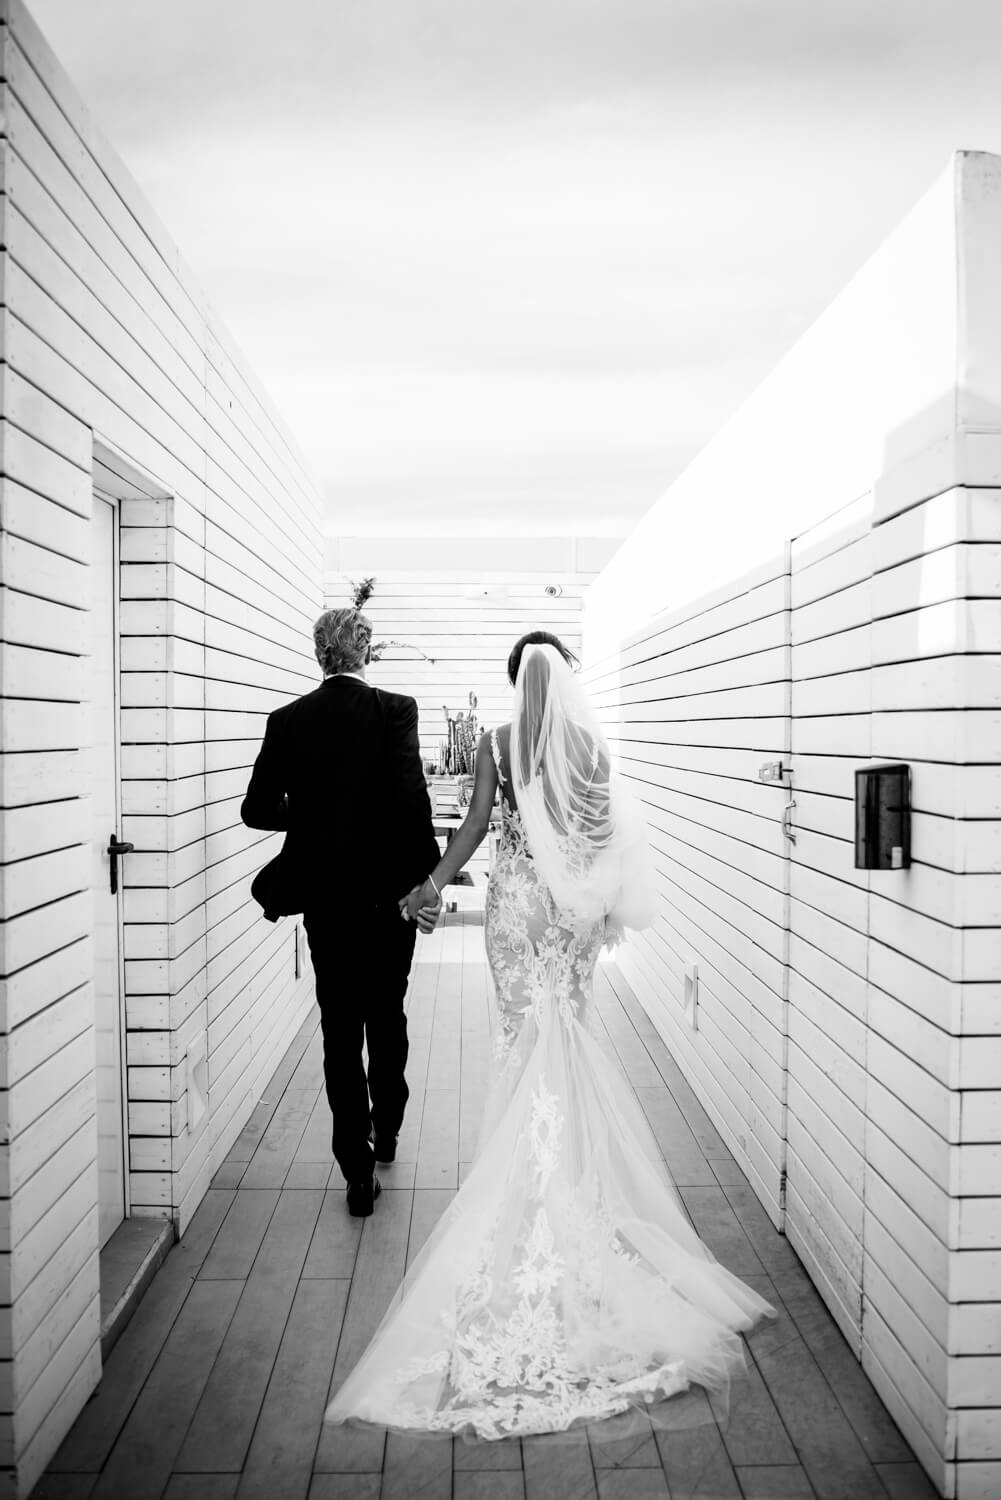 Monochrome - BnW bride and groom just married, Ibiza at Nikki beach